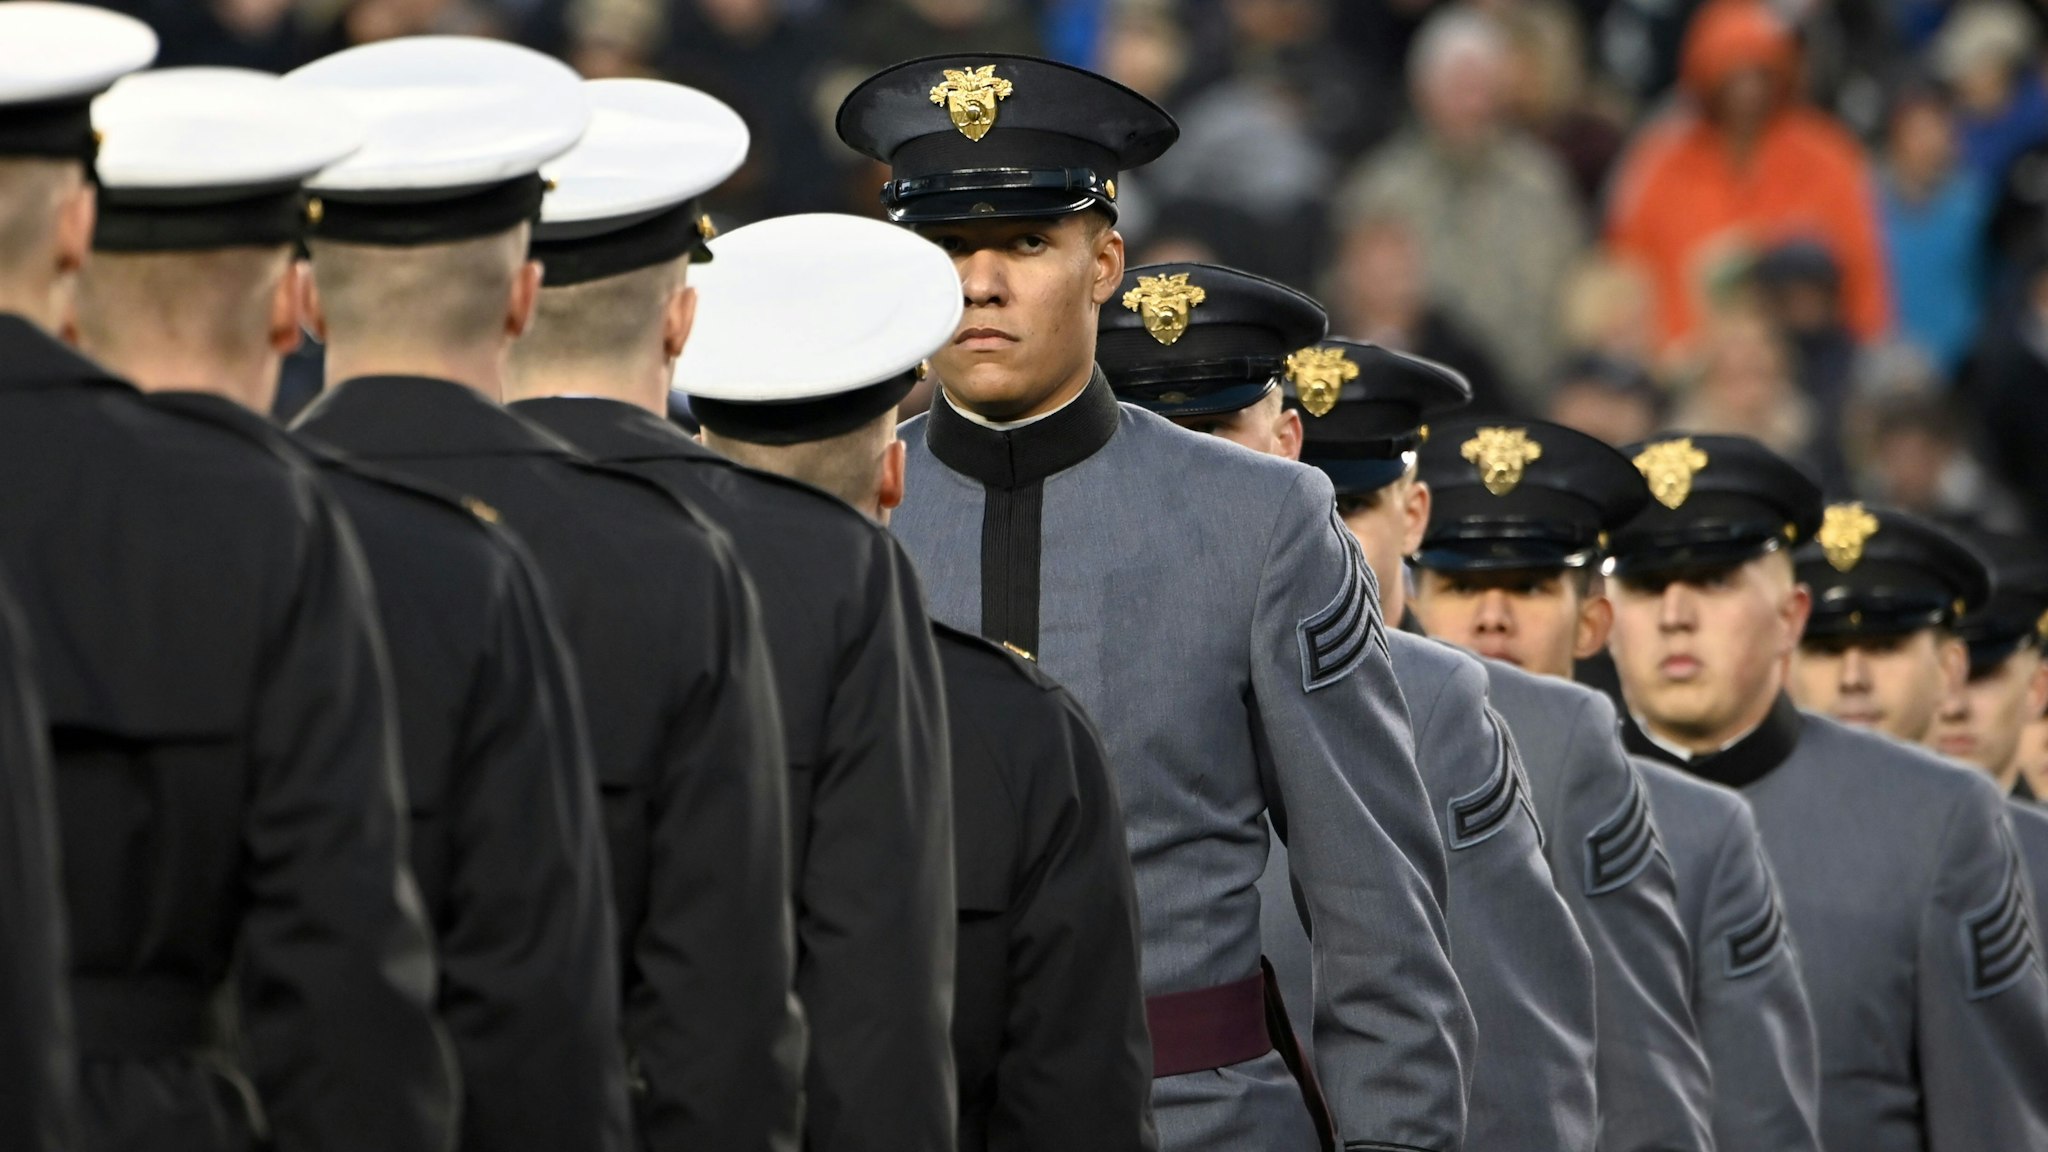 Army and Navy members meet half way as US President Donald Trump attends the Army-Navy football game in Philadelphia, Pennsylvania on December 14, 2019. (Photo by Andrew Caballero-Reynolds / AFP) (Photo by ANDREW CABALLERO-REYNOLDS/AFP via Getty Images)